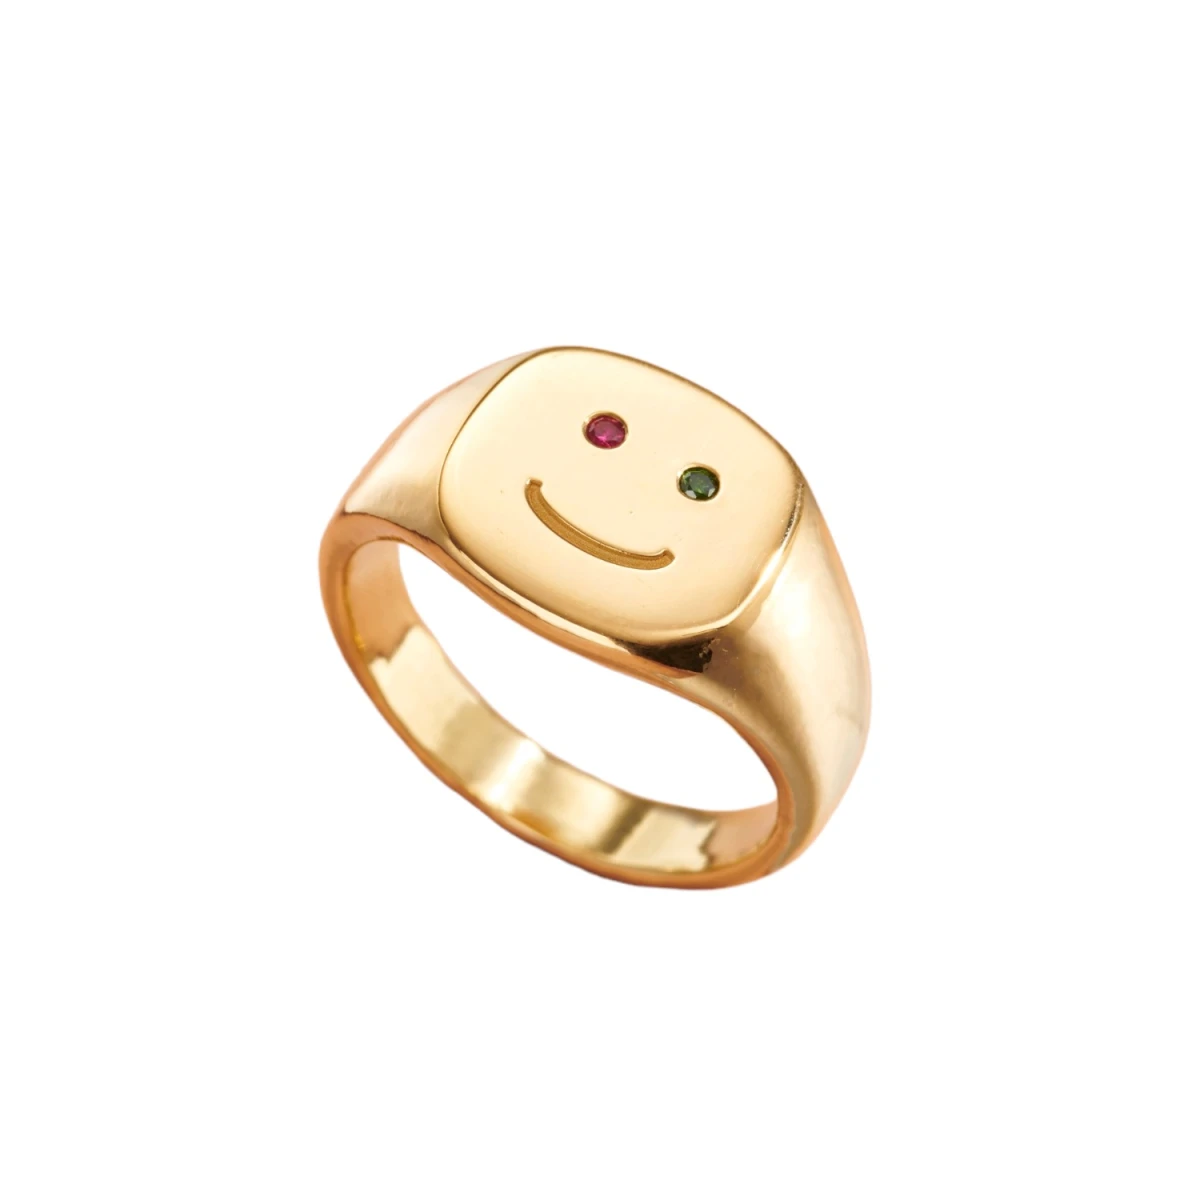 Posh Totty Designs Gold Plated Emerald And Ruby Smiley Face Signet Ring